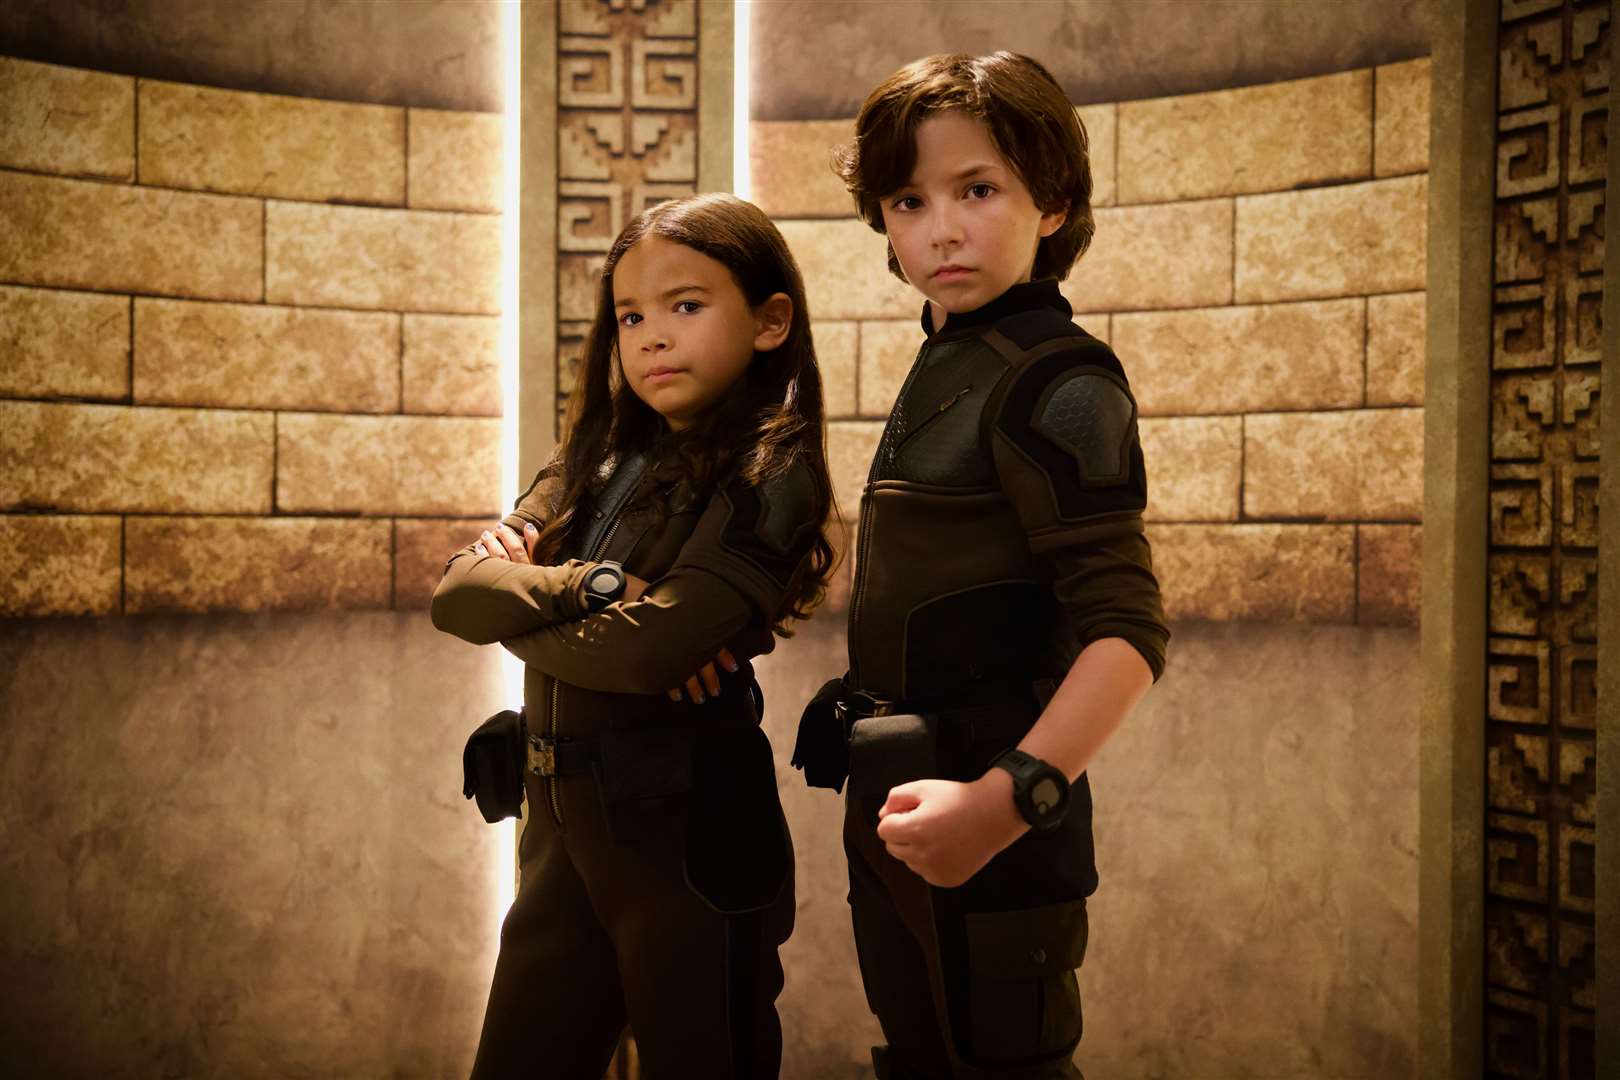 Spy Kids: Armageddon withh Everly Carganilla as Patty Torrez and Connor Esterson as Tony Torrez. Picture: Netflix/Robert Rodriguez © 2023 PA Media